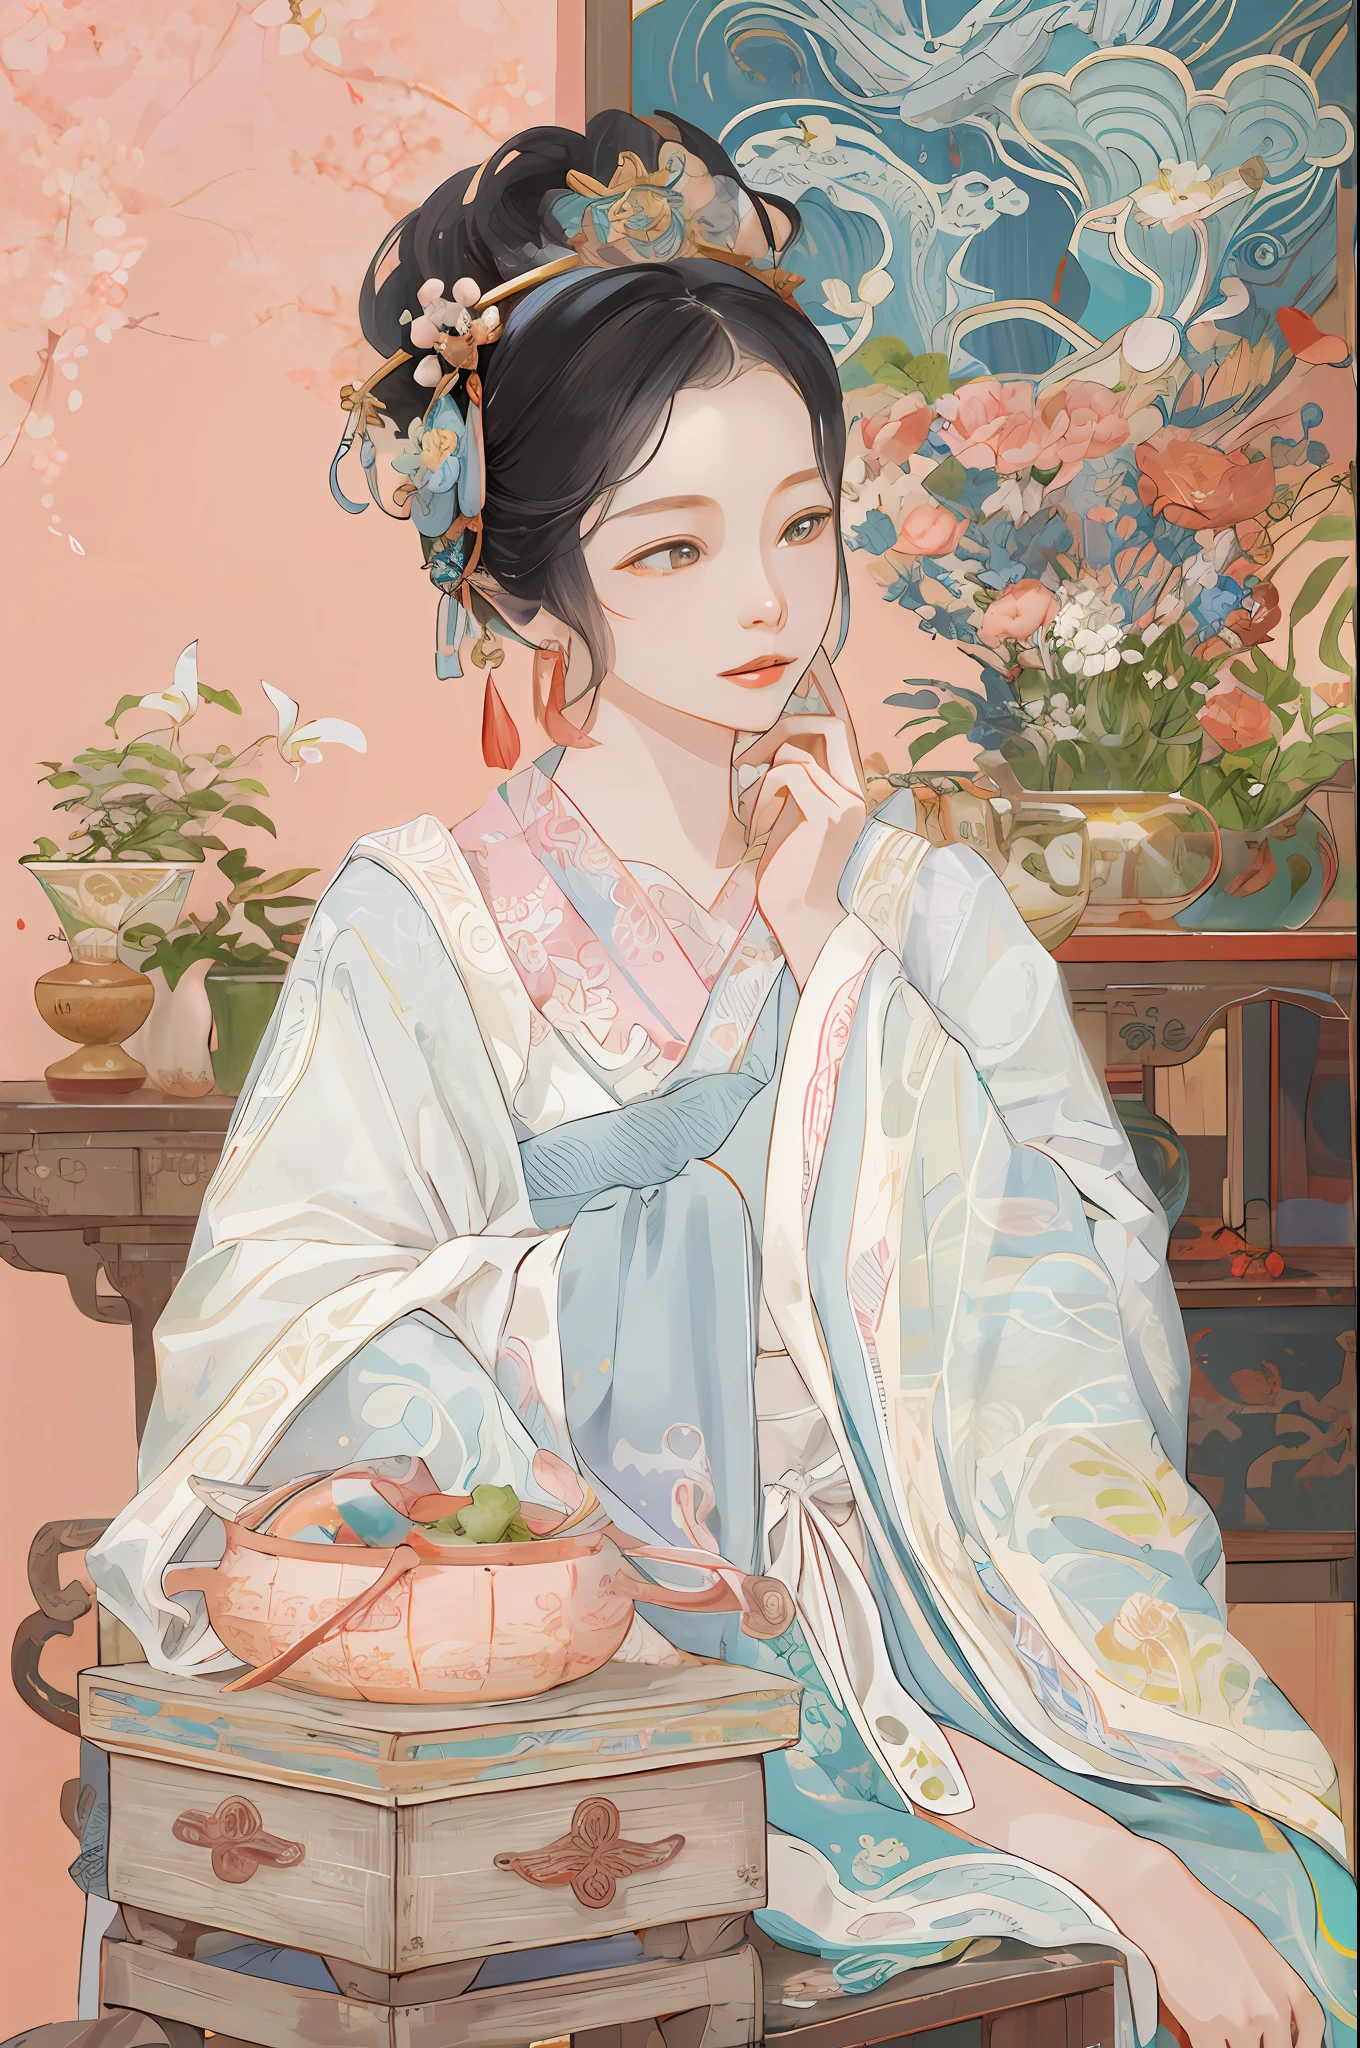 Painting a woman in a blue dress sitting on a stool, Palace ， A girl in Hanfu, Inspired by Qiu Ying, ancient chinese beauti, author：Qiu Ying, inspired by Tang Yin, author：Li Fangying, author：Qu Leilei, ancient china art style, Wearing ancient Chinese clothes, author：Yu Zheding, Hanfu, author：Xu Xi